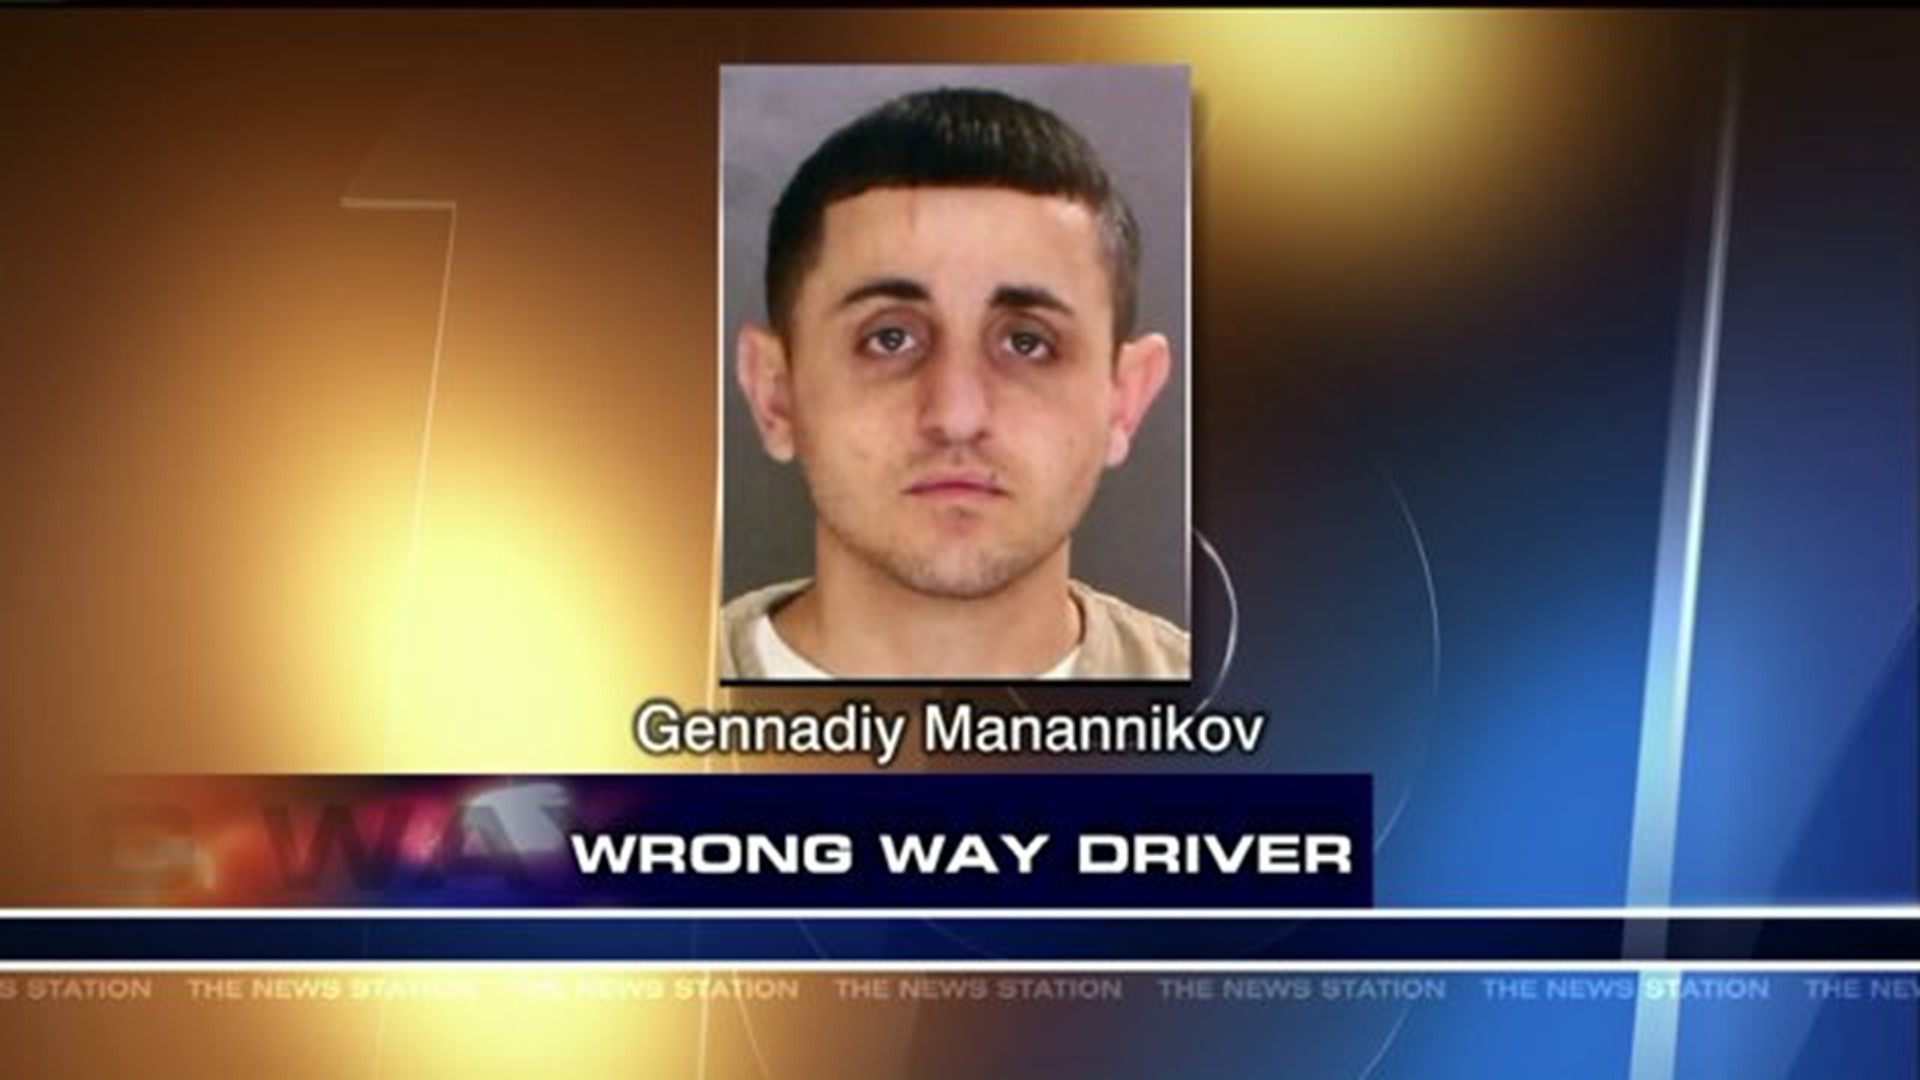 More Charges Filed against Driver in Deadly Wrong-Way Crash